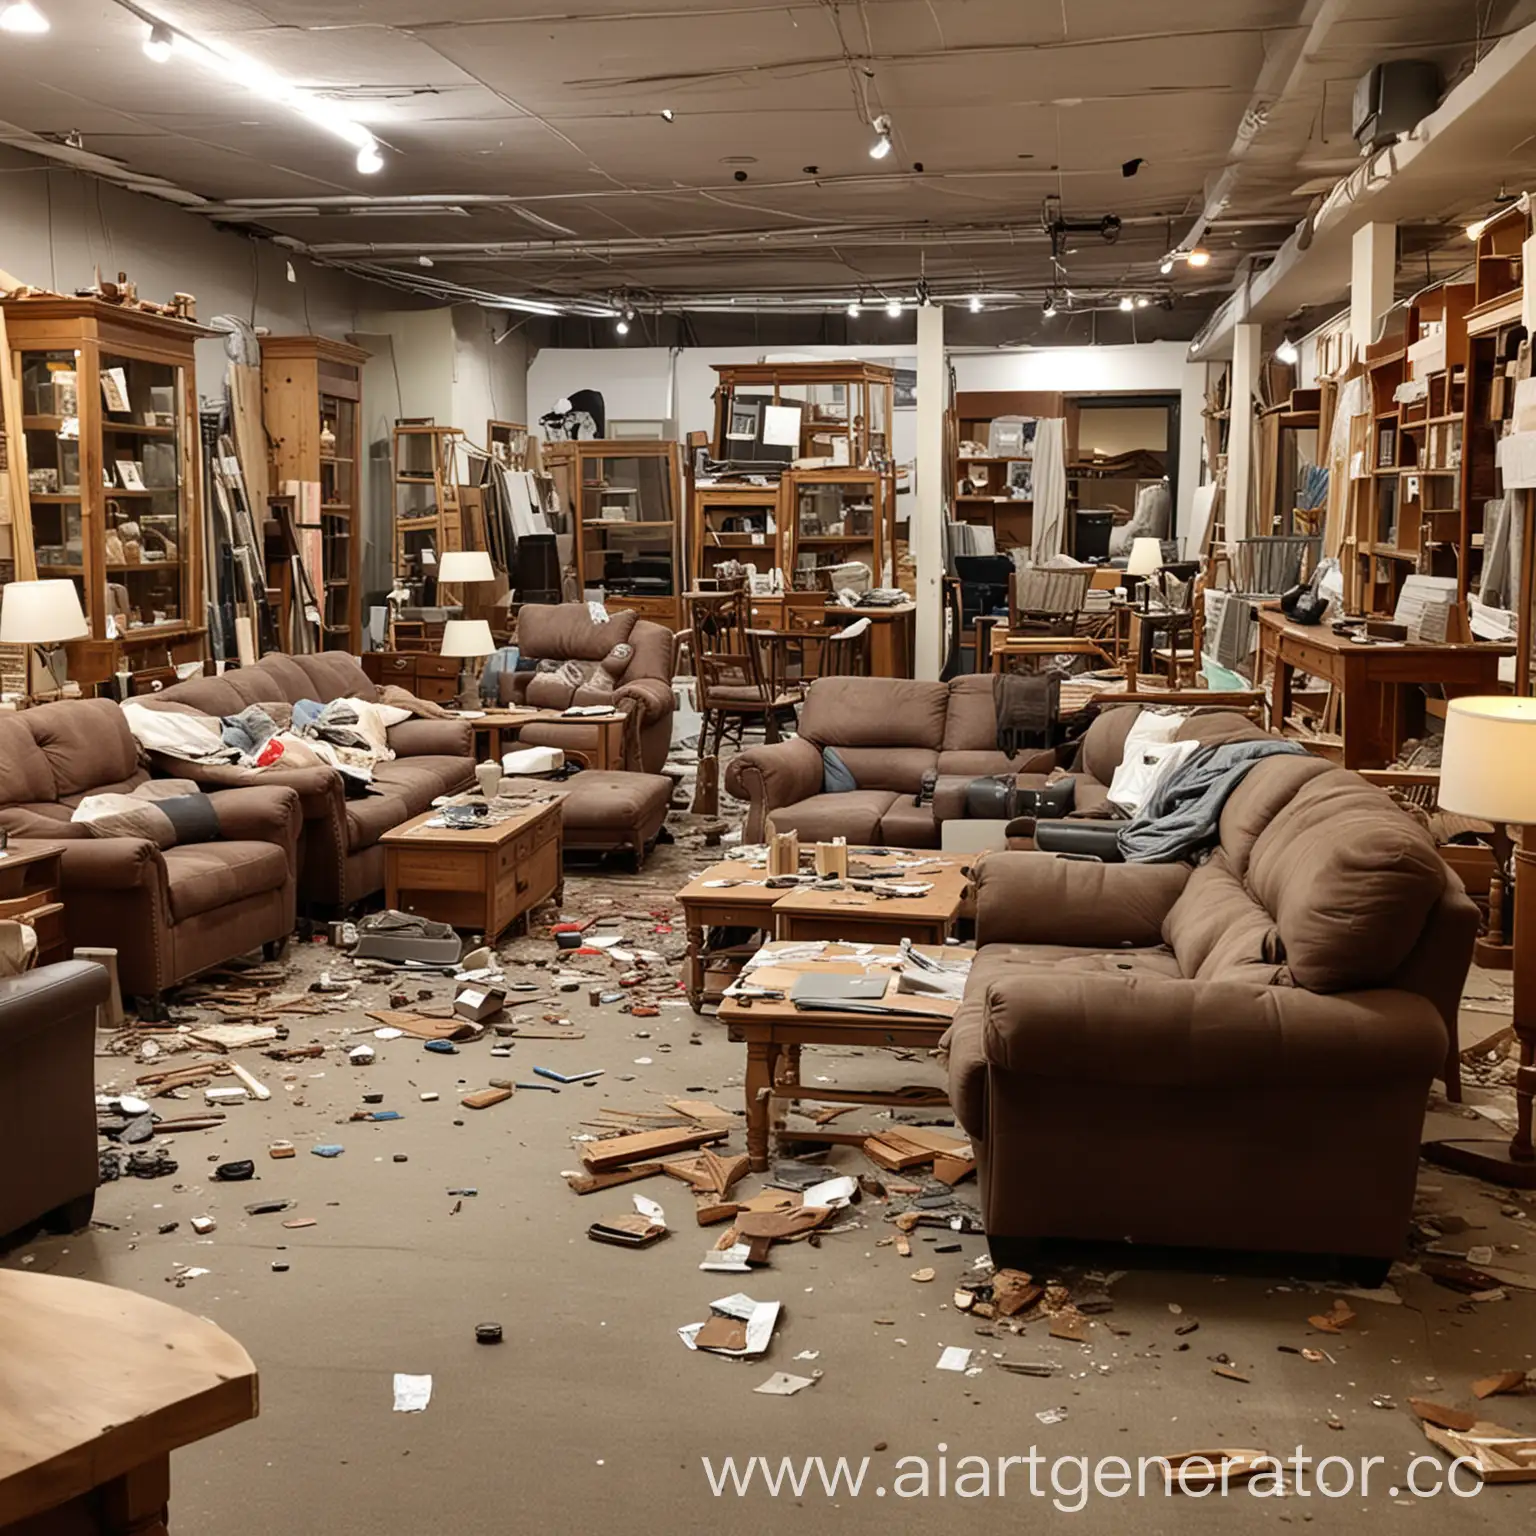 Chaos-in-a-Furniture-Store-Unruly-Display-Amidst-Shopping-Rush